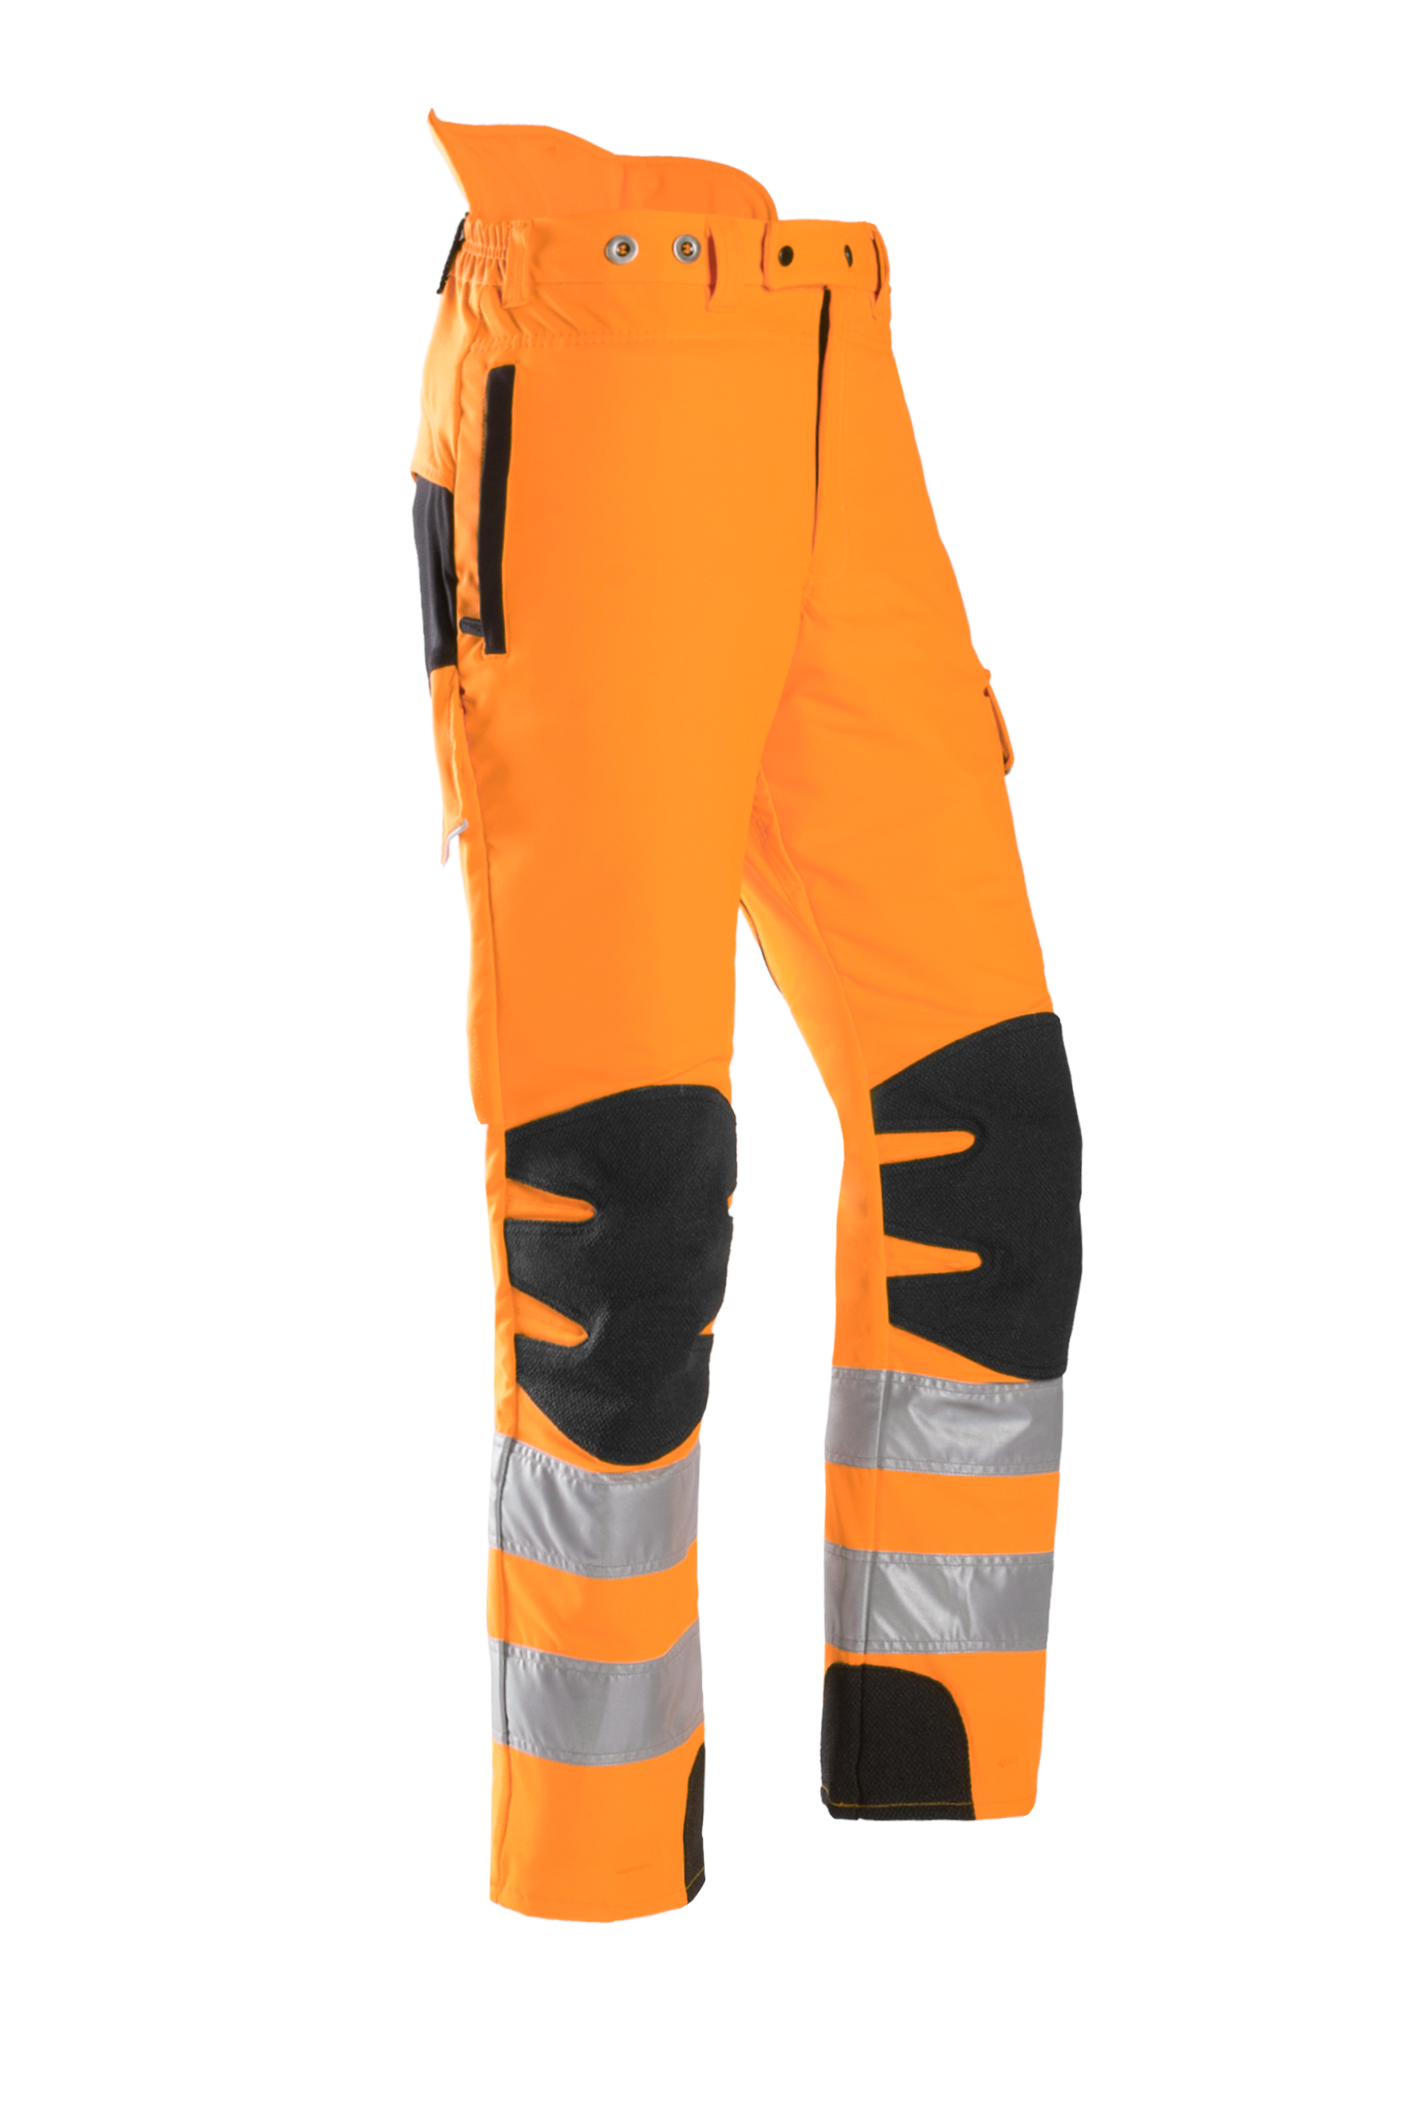 Buy excellent quality in Chainsaw trousers for better protection -  thefashiontamer.com | Type of pants, Chainsaw pants, Chaps clothes